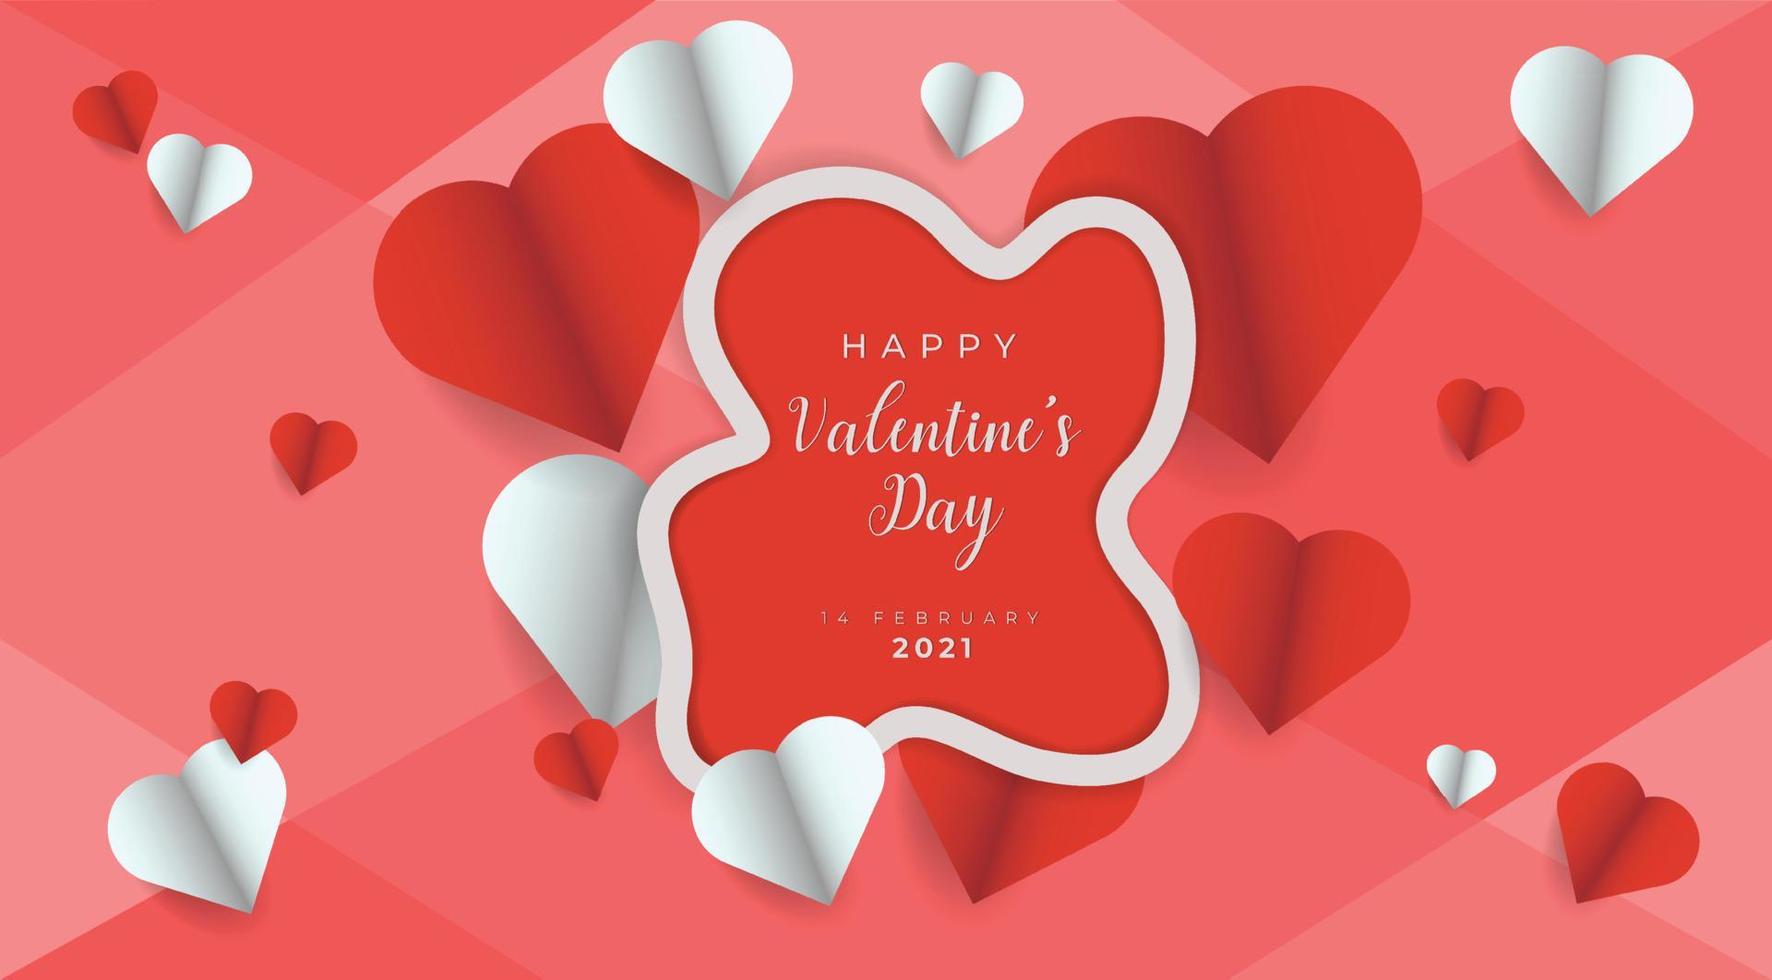 Happy Valentine's Day Background red and white vector